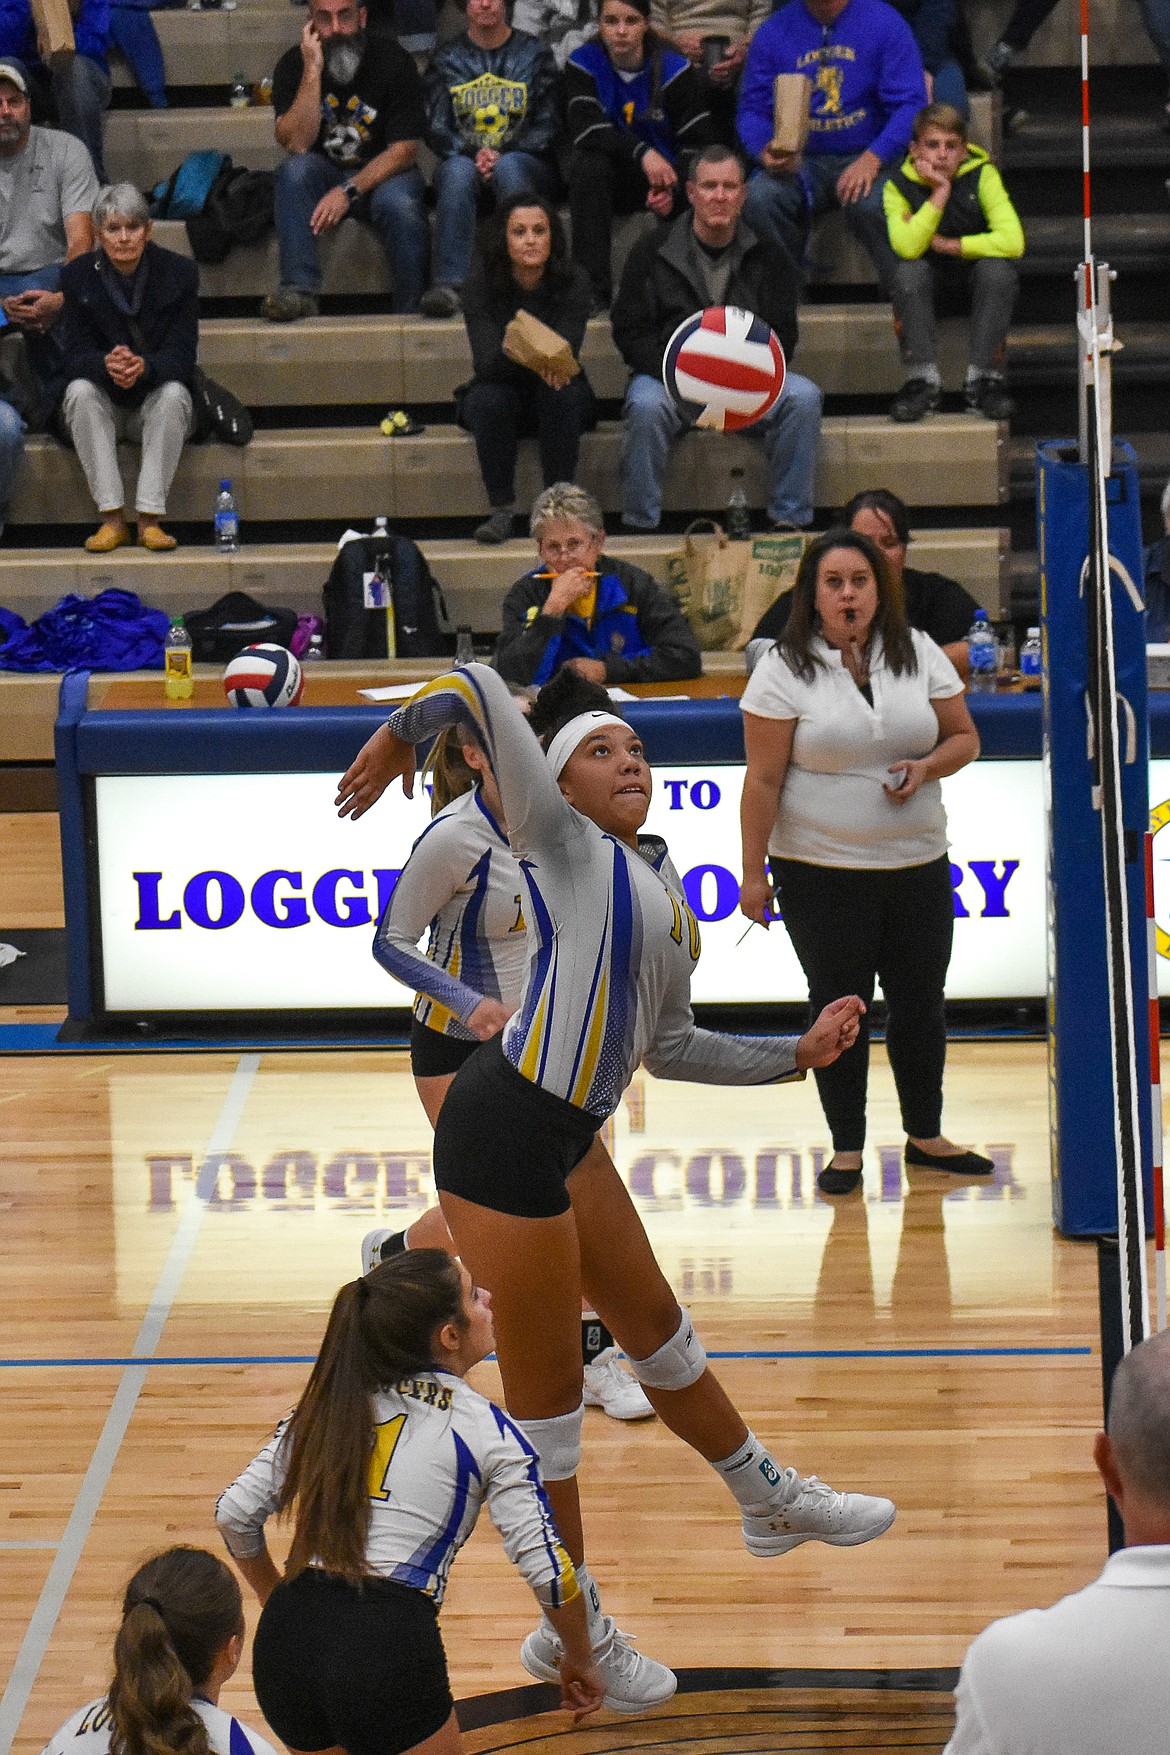 Libby senior Mehki Sykes goes for an attack during the first set of the Lady Loggers&#146; homecoming match against Browning Saturday. (Ben Kibbey/The Western News)